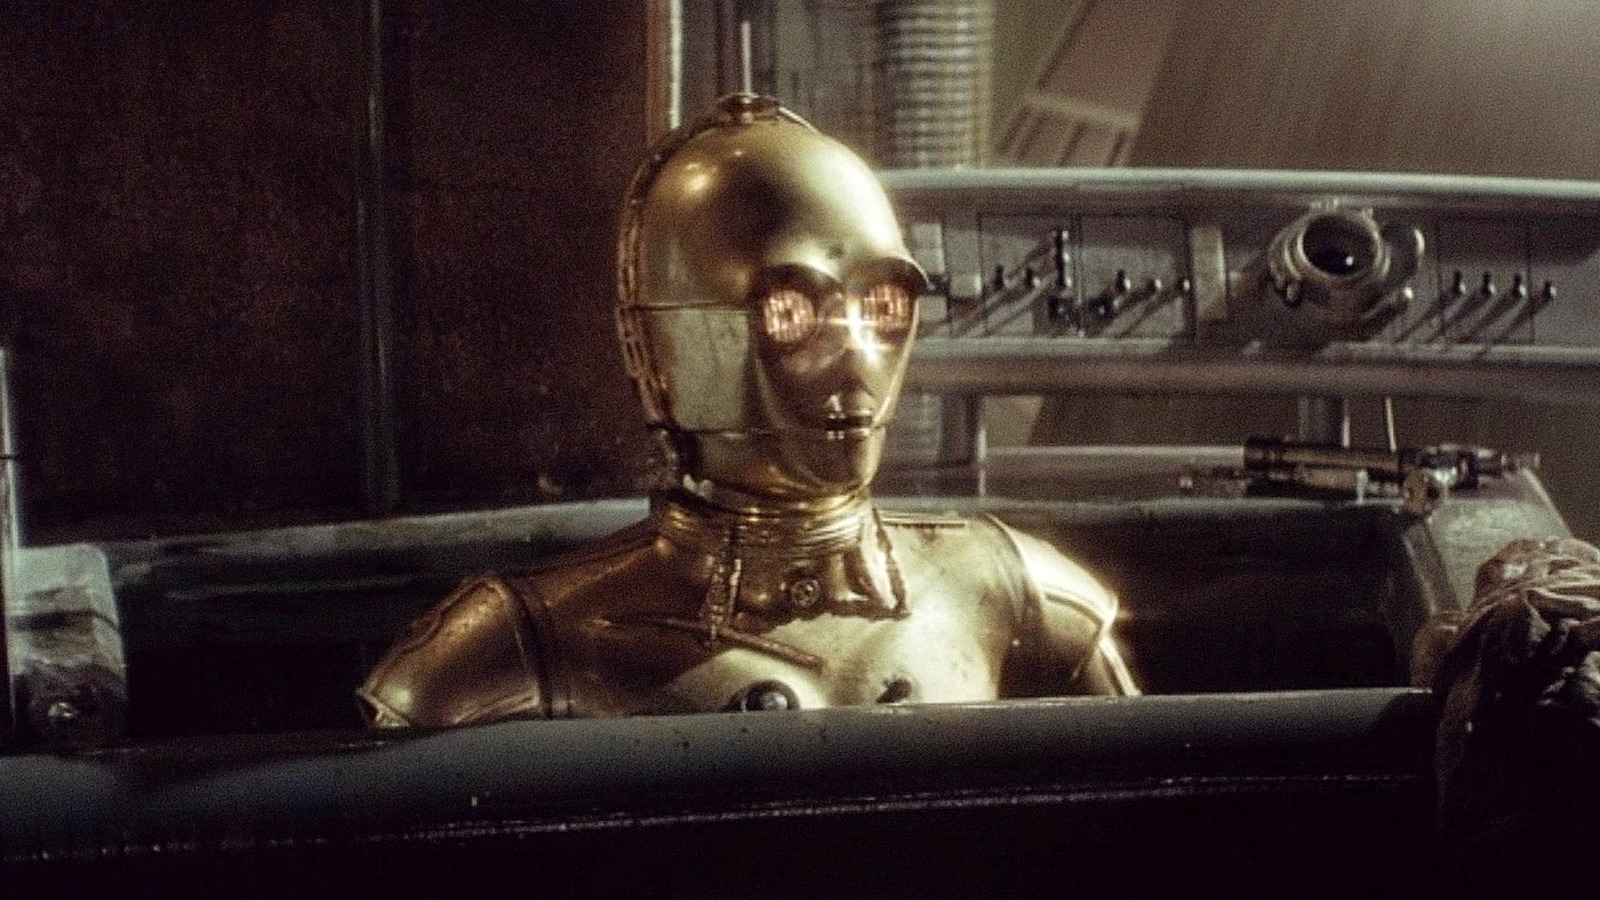 C-3PO’s Oil Bath In Star Wars Was A ‘Disgusting Experience’ Behind The Scenes